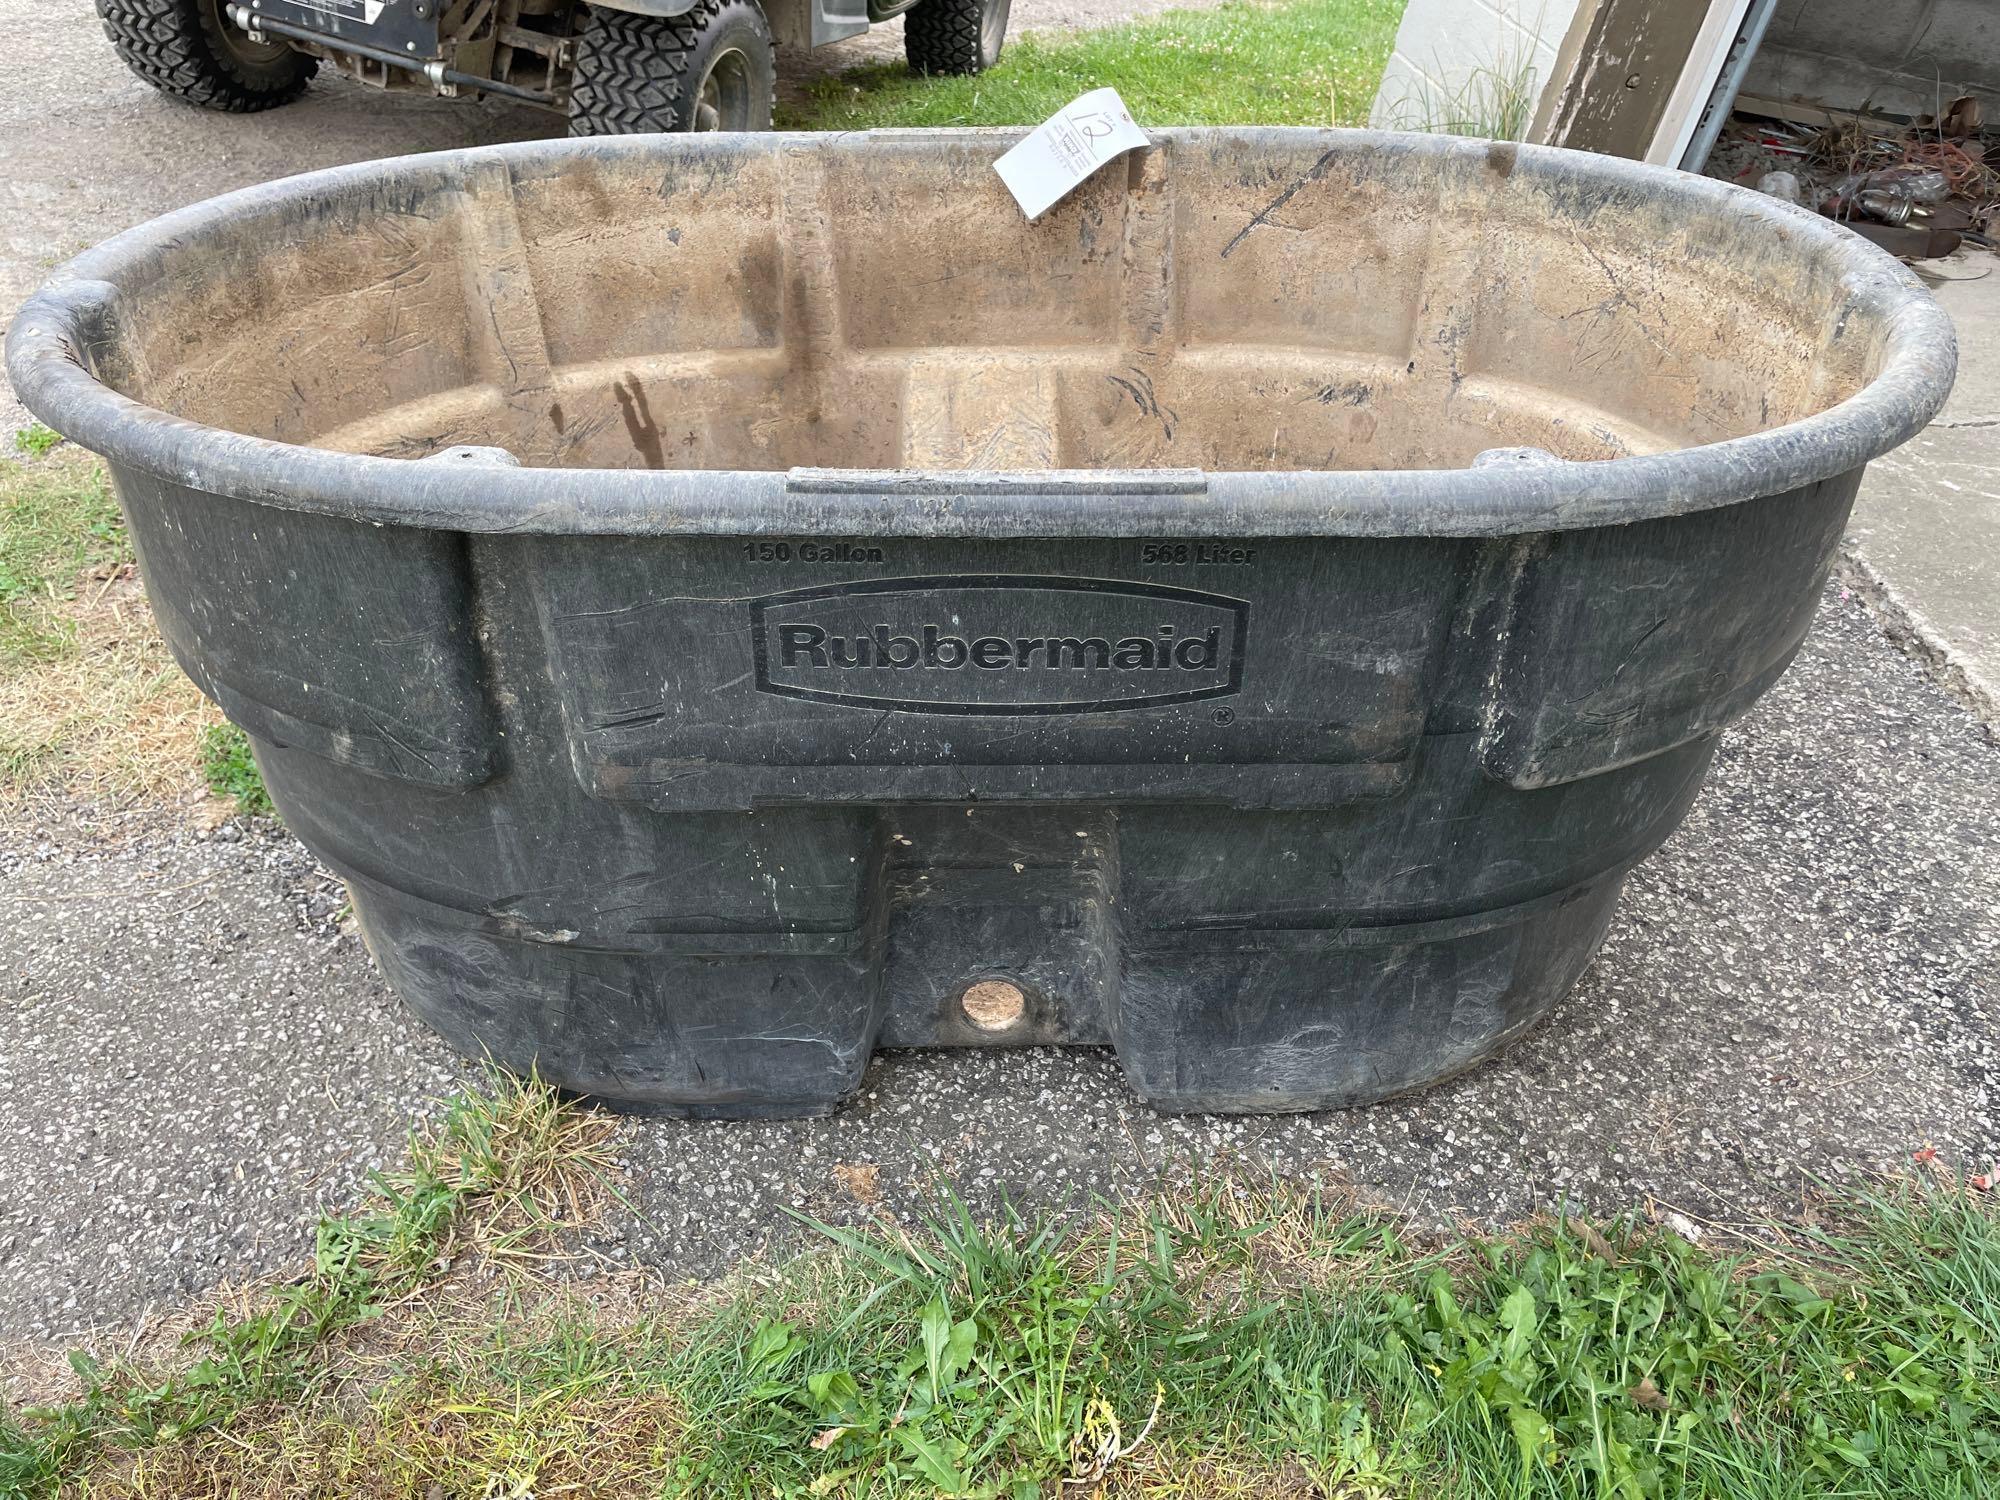 Rubbermaid 150 gallon poly tank; Site 3: Grand Meadow, MN - Maring Auction  Co LLC